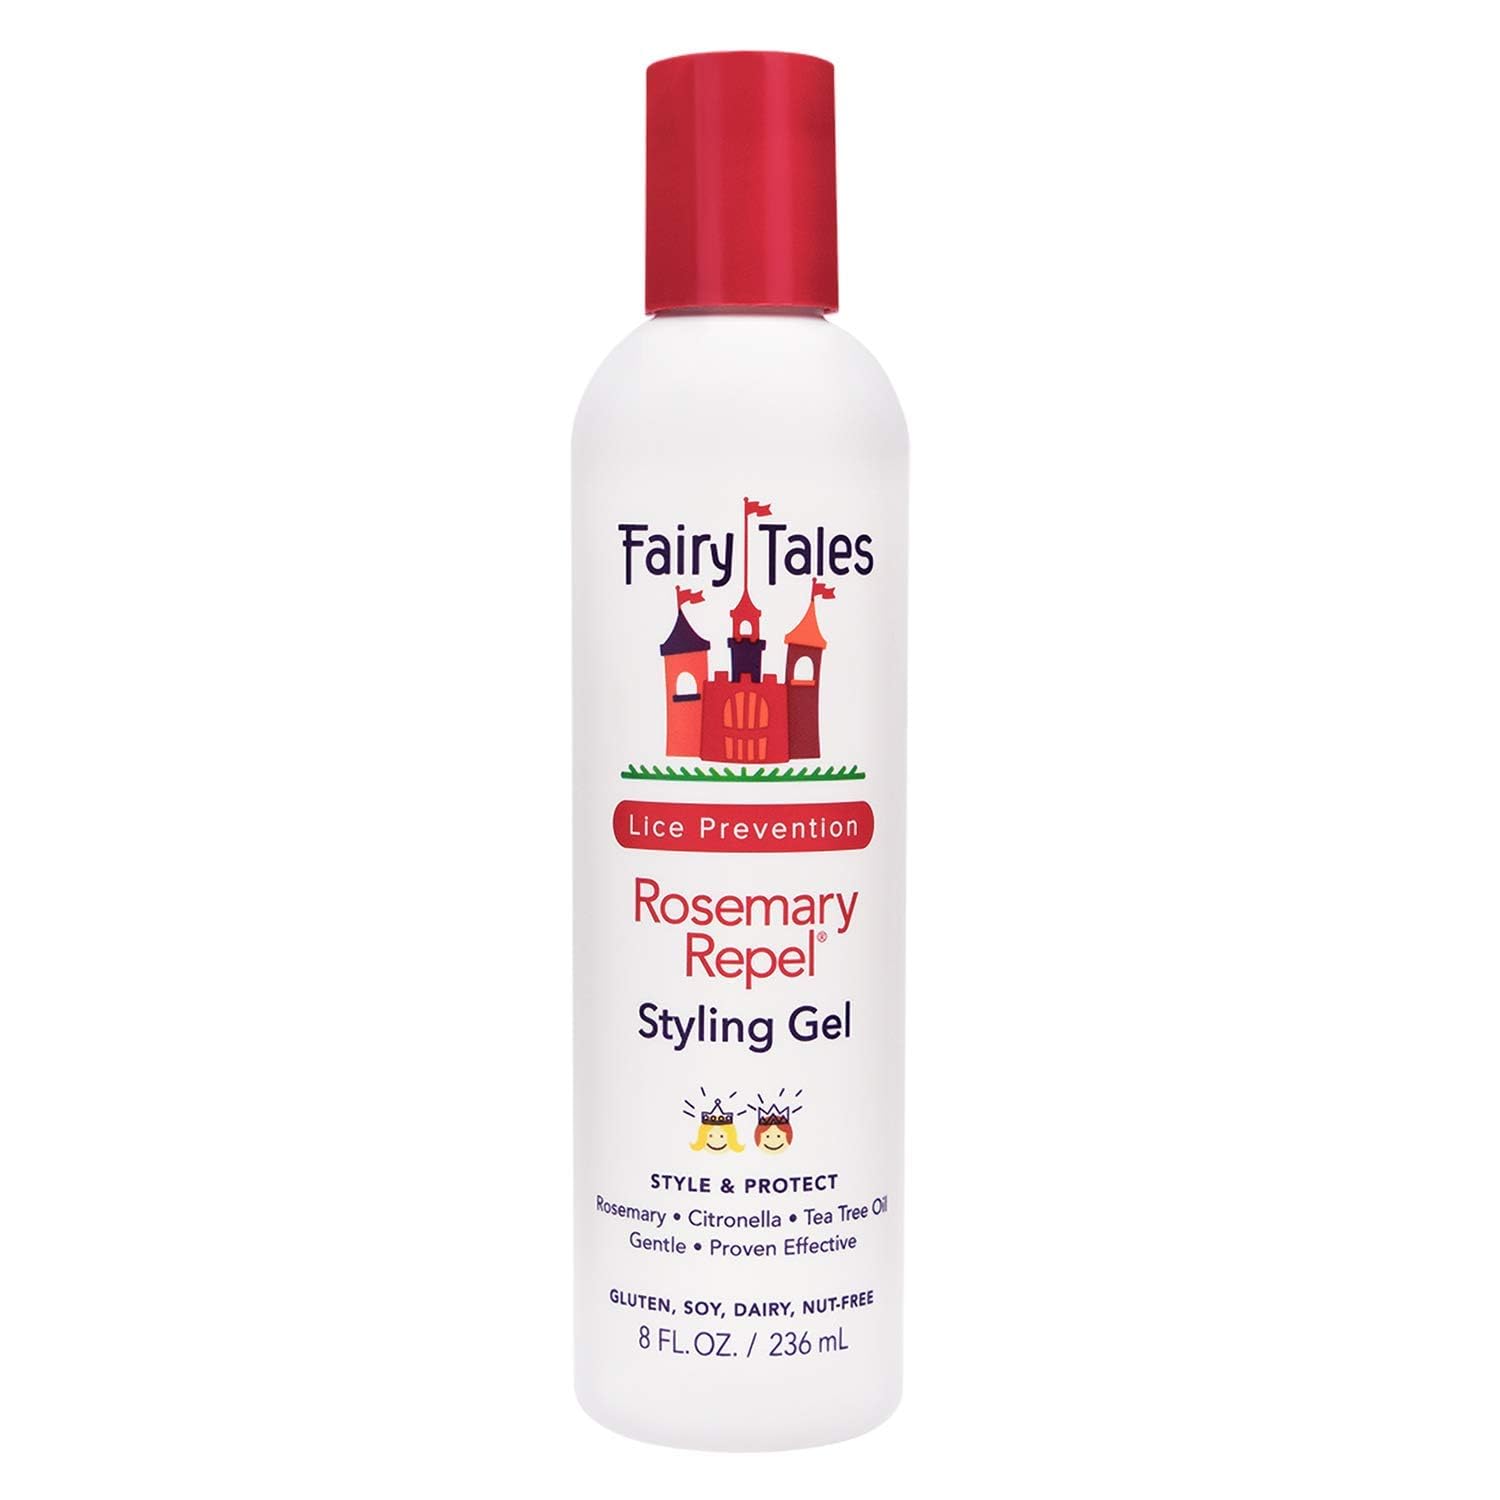 Fairy Tales Rosemary Repel Daily Kids Hair Gel – Kids Like the Smell, Lice Do Not, 8 fl oz. (Pack of 1)